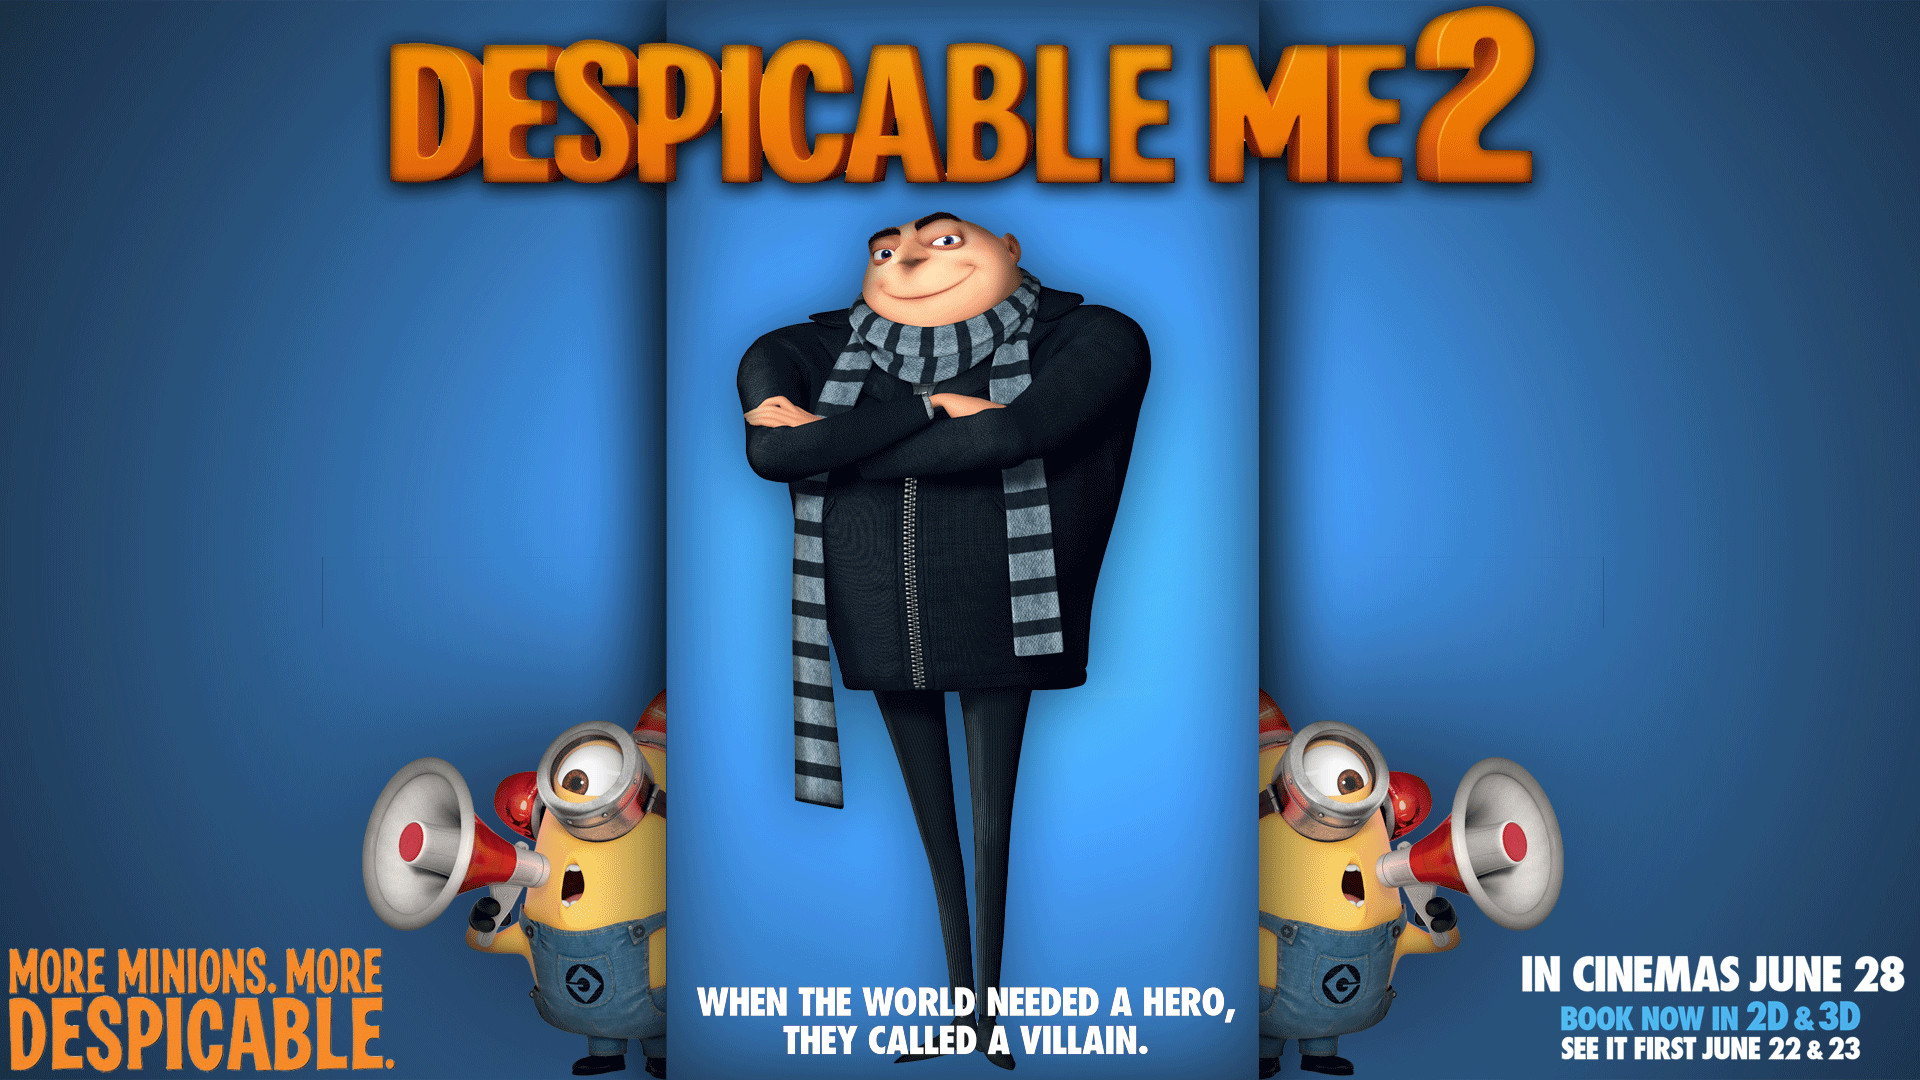 1920x1080 ... Despicable Me 2 (background) by cursedblade1337